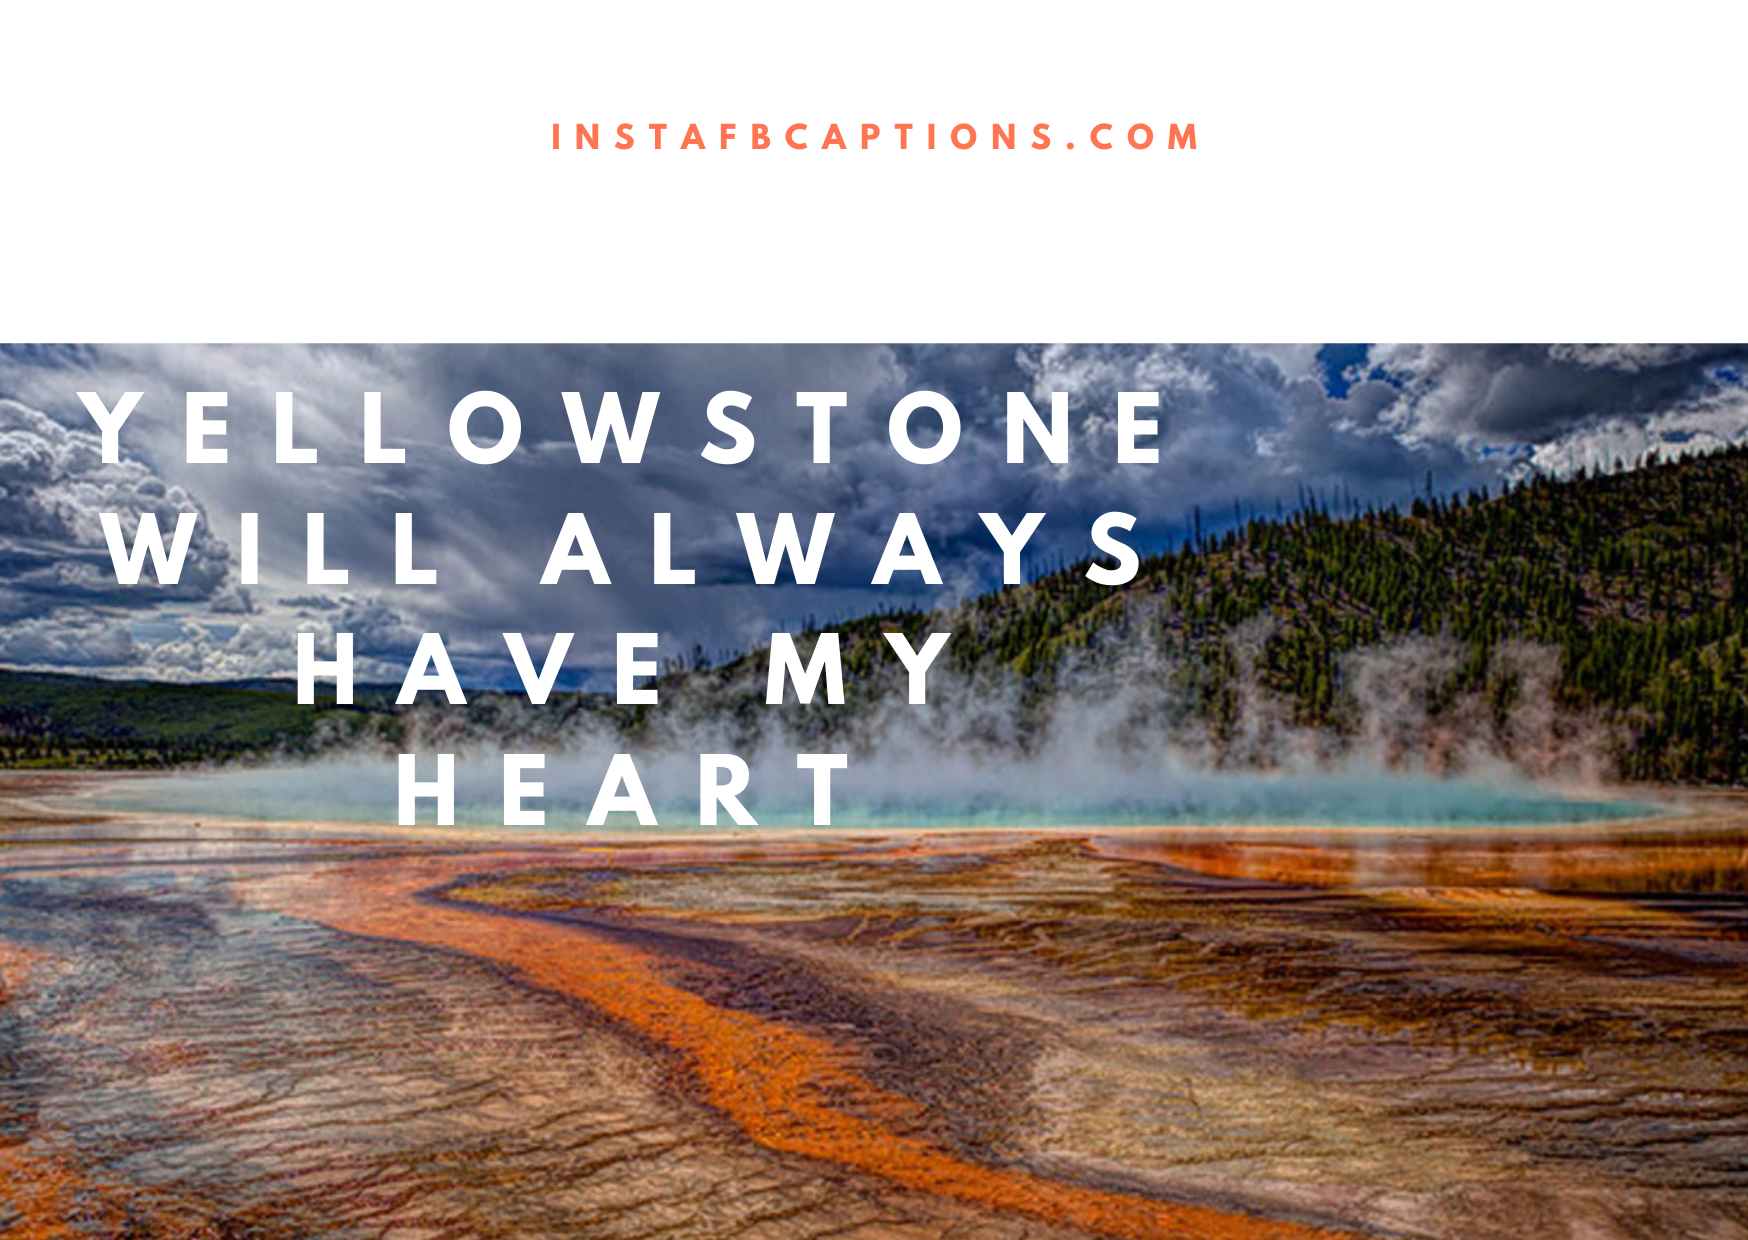 Inspirational Yellowstone Captions  - Inspirational Yellowstone Captions - Best Yellowstone Instagram Captions in 2022